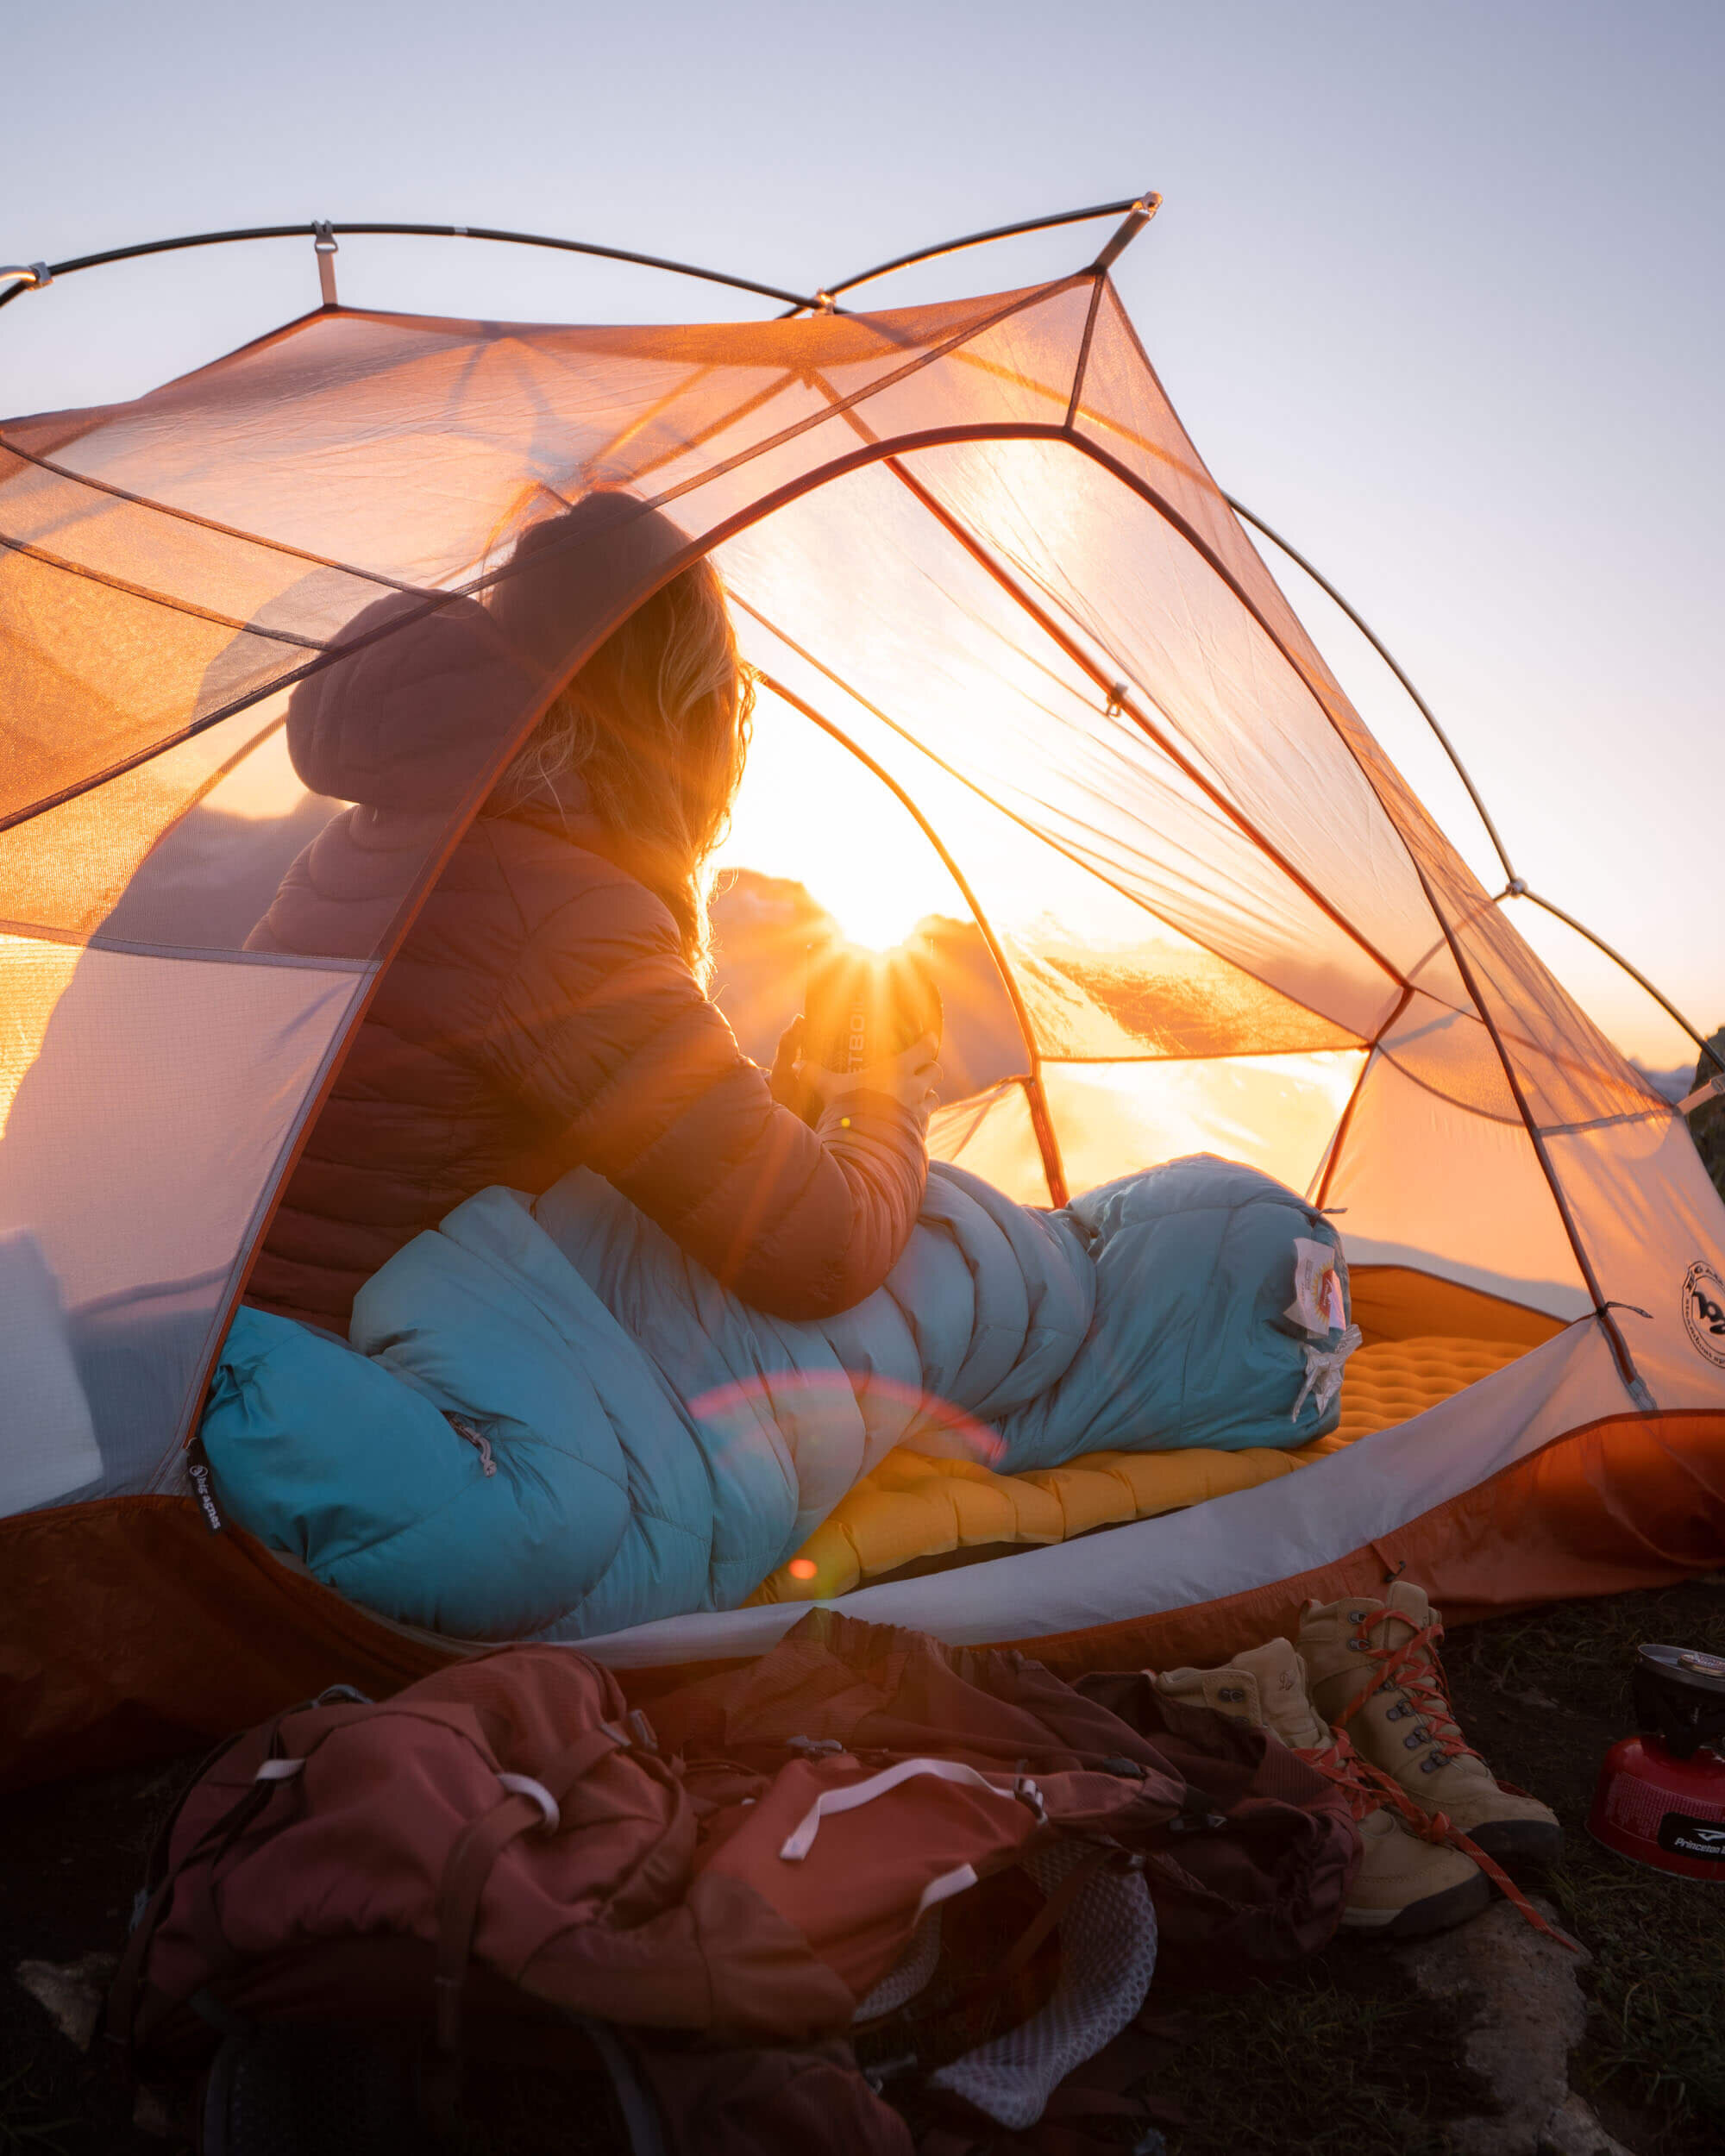 Waking up at sunrise in the North Cascades. Wearing:  Arc'teryx Cerium LT Hooded Down Jacket . Also shown:  Marmot Women's Xenon 15° Sleeping Bag ,  NEMO Sleeping Pad ,  Big Agnes Copper Spur HV UL 2P Tent .